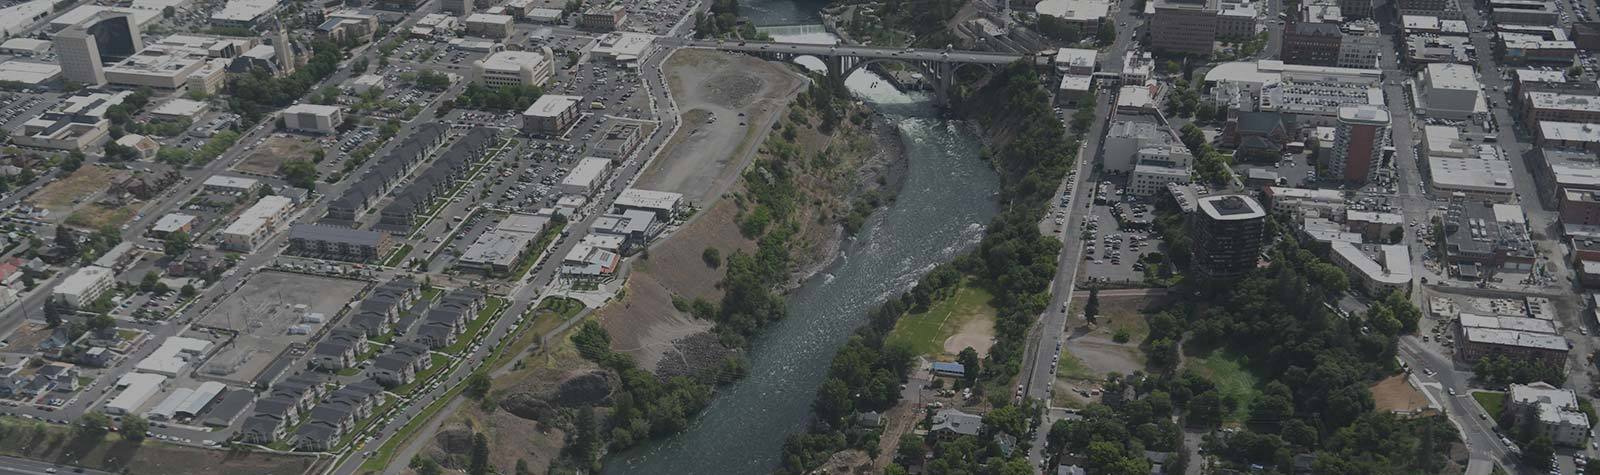 Limits on cancer-causing PCB pollutants in Spokane River